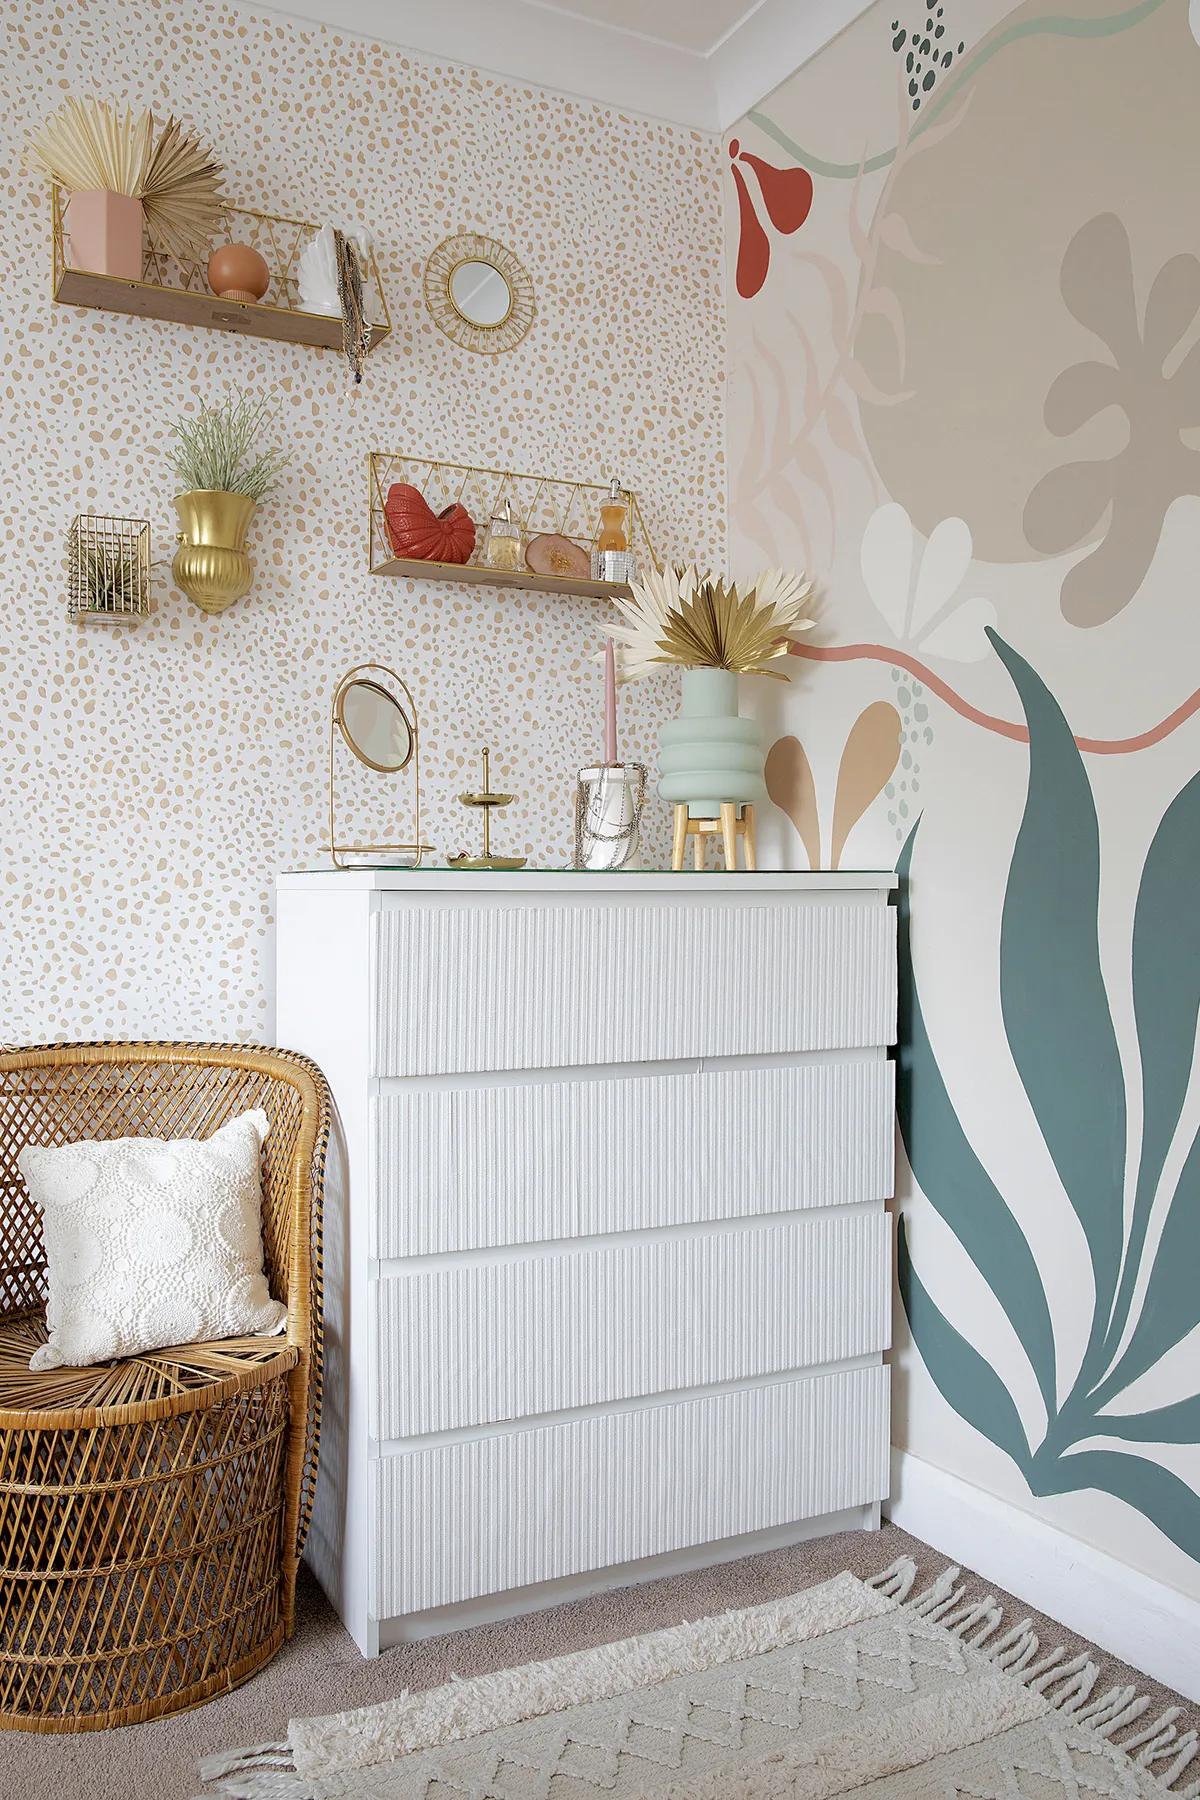 Some clever upcycling has given these scratched drawers a new lease of life. ‘I considered wooden dowels on the front, but it would’ve been time-consuming to do, so I used wallpaper instead to give a similar effect.’ The gold shelves are from B&M